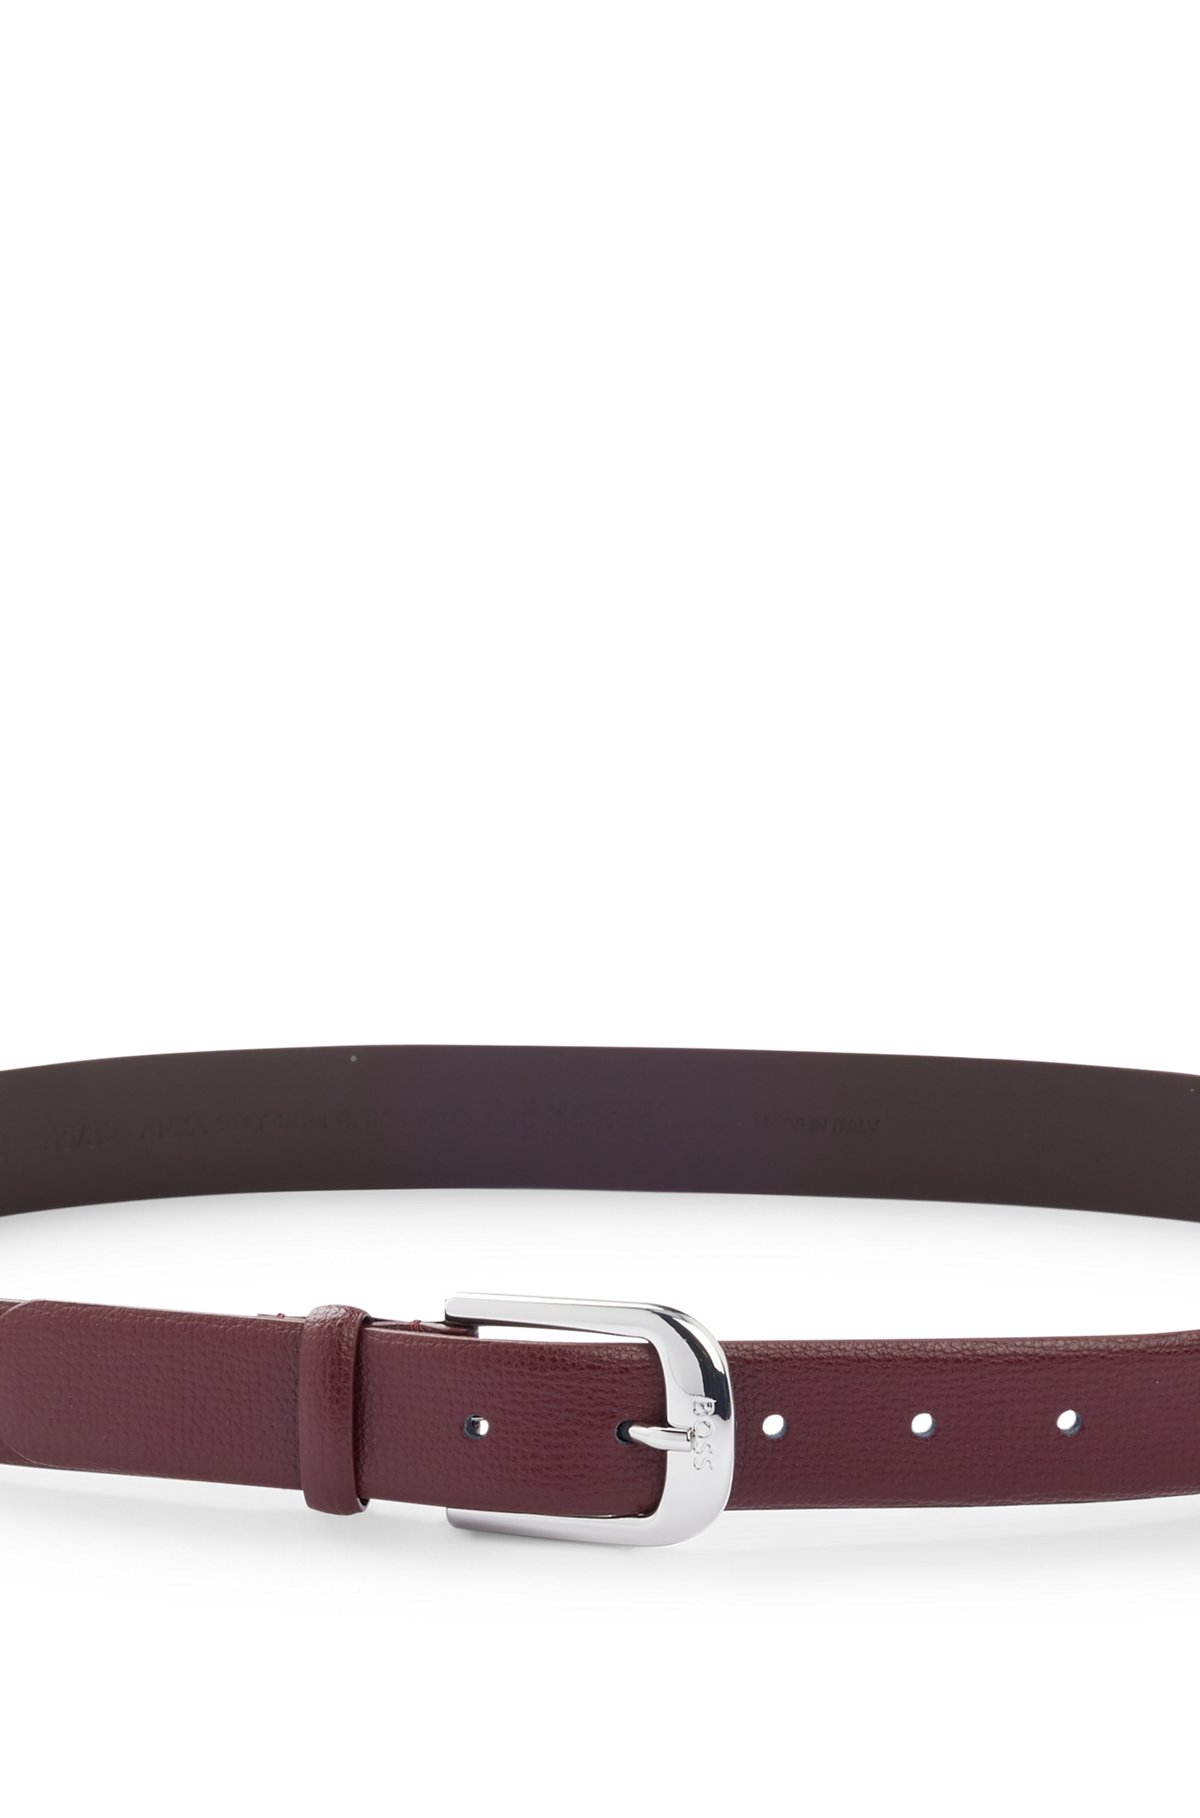 Italian-leather belt with engraved-logo buckle, Dark Red